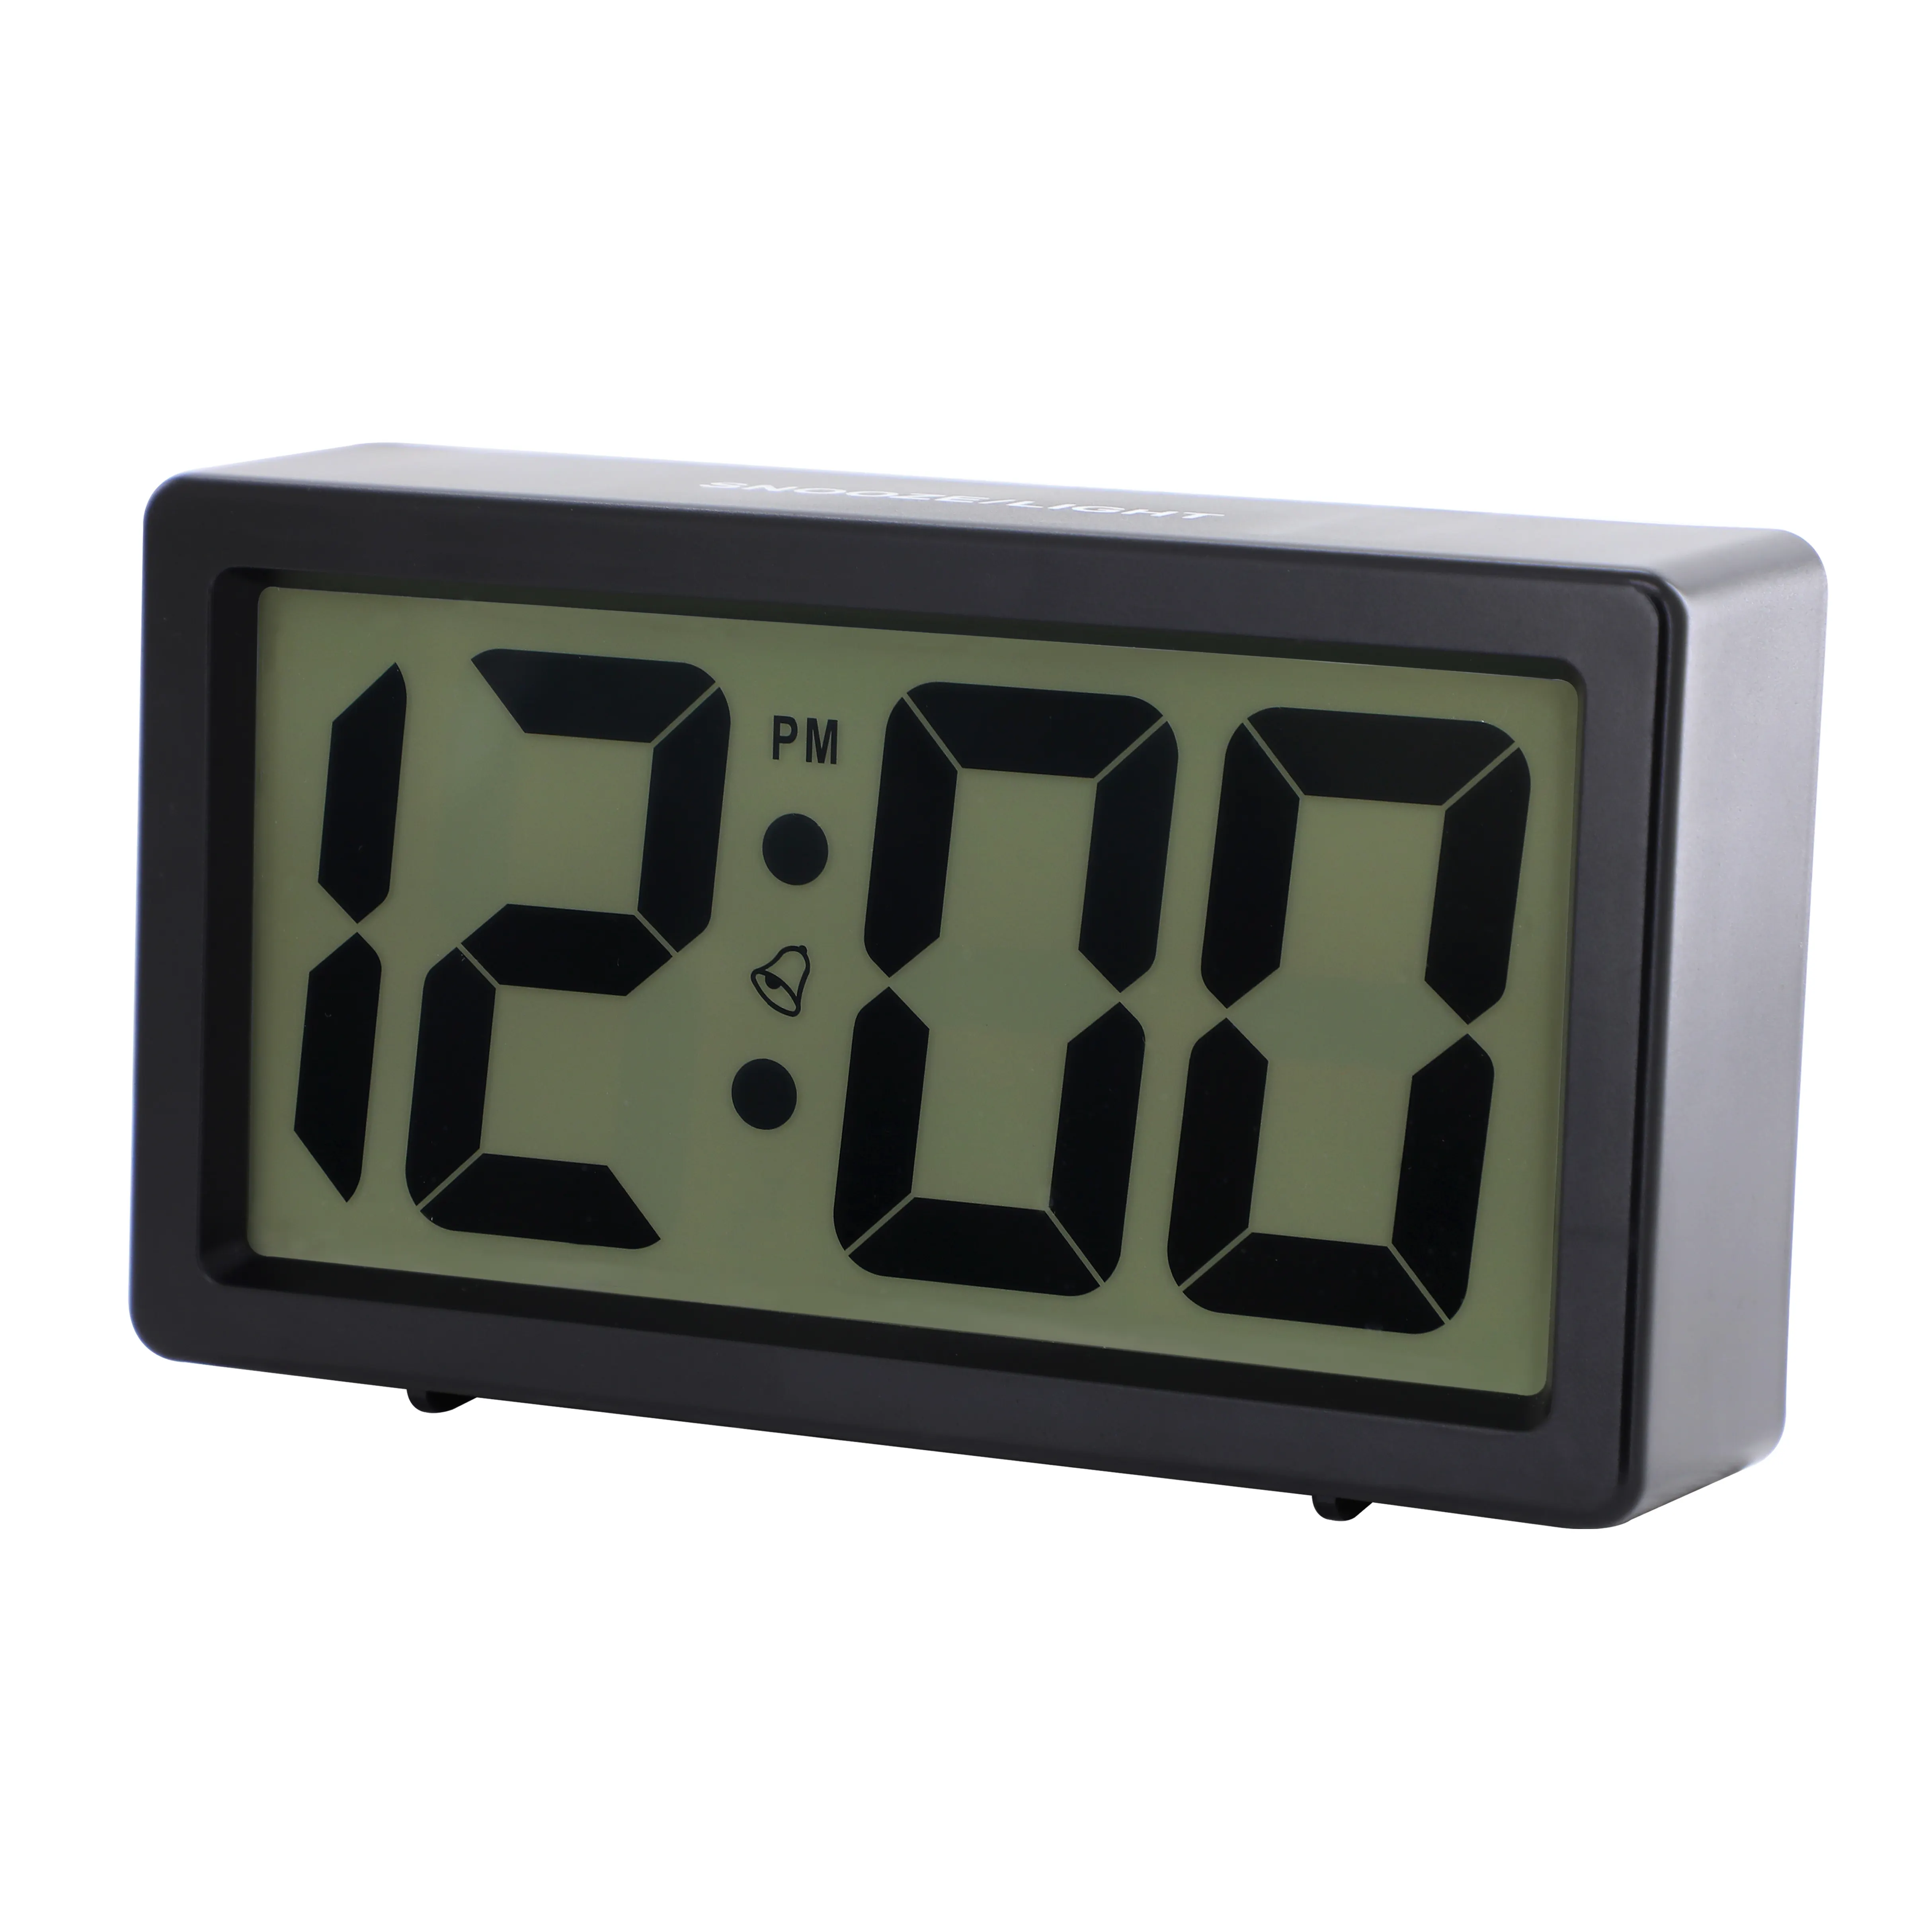 Hot Selling Simple Classical Table Smart Digital Alarm LCD Clocks With Back Light Snooze For Office Bedroom